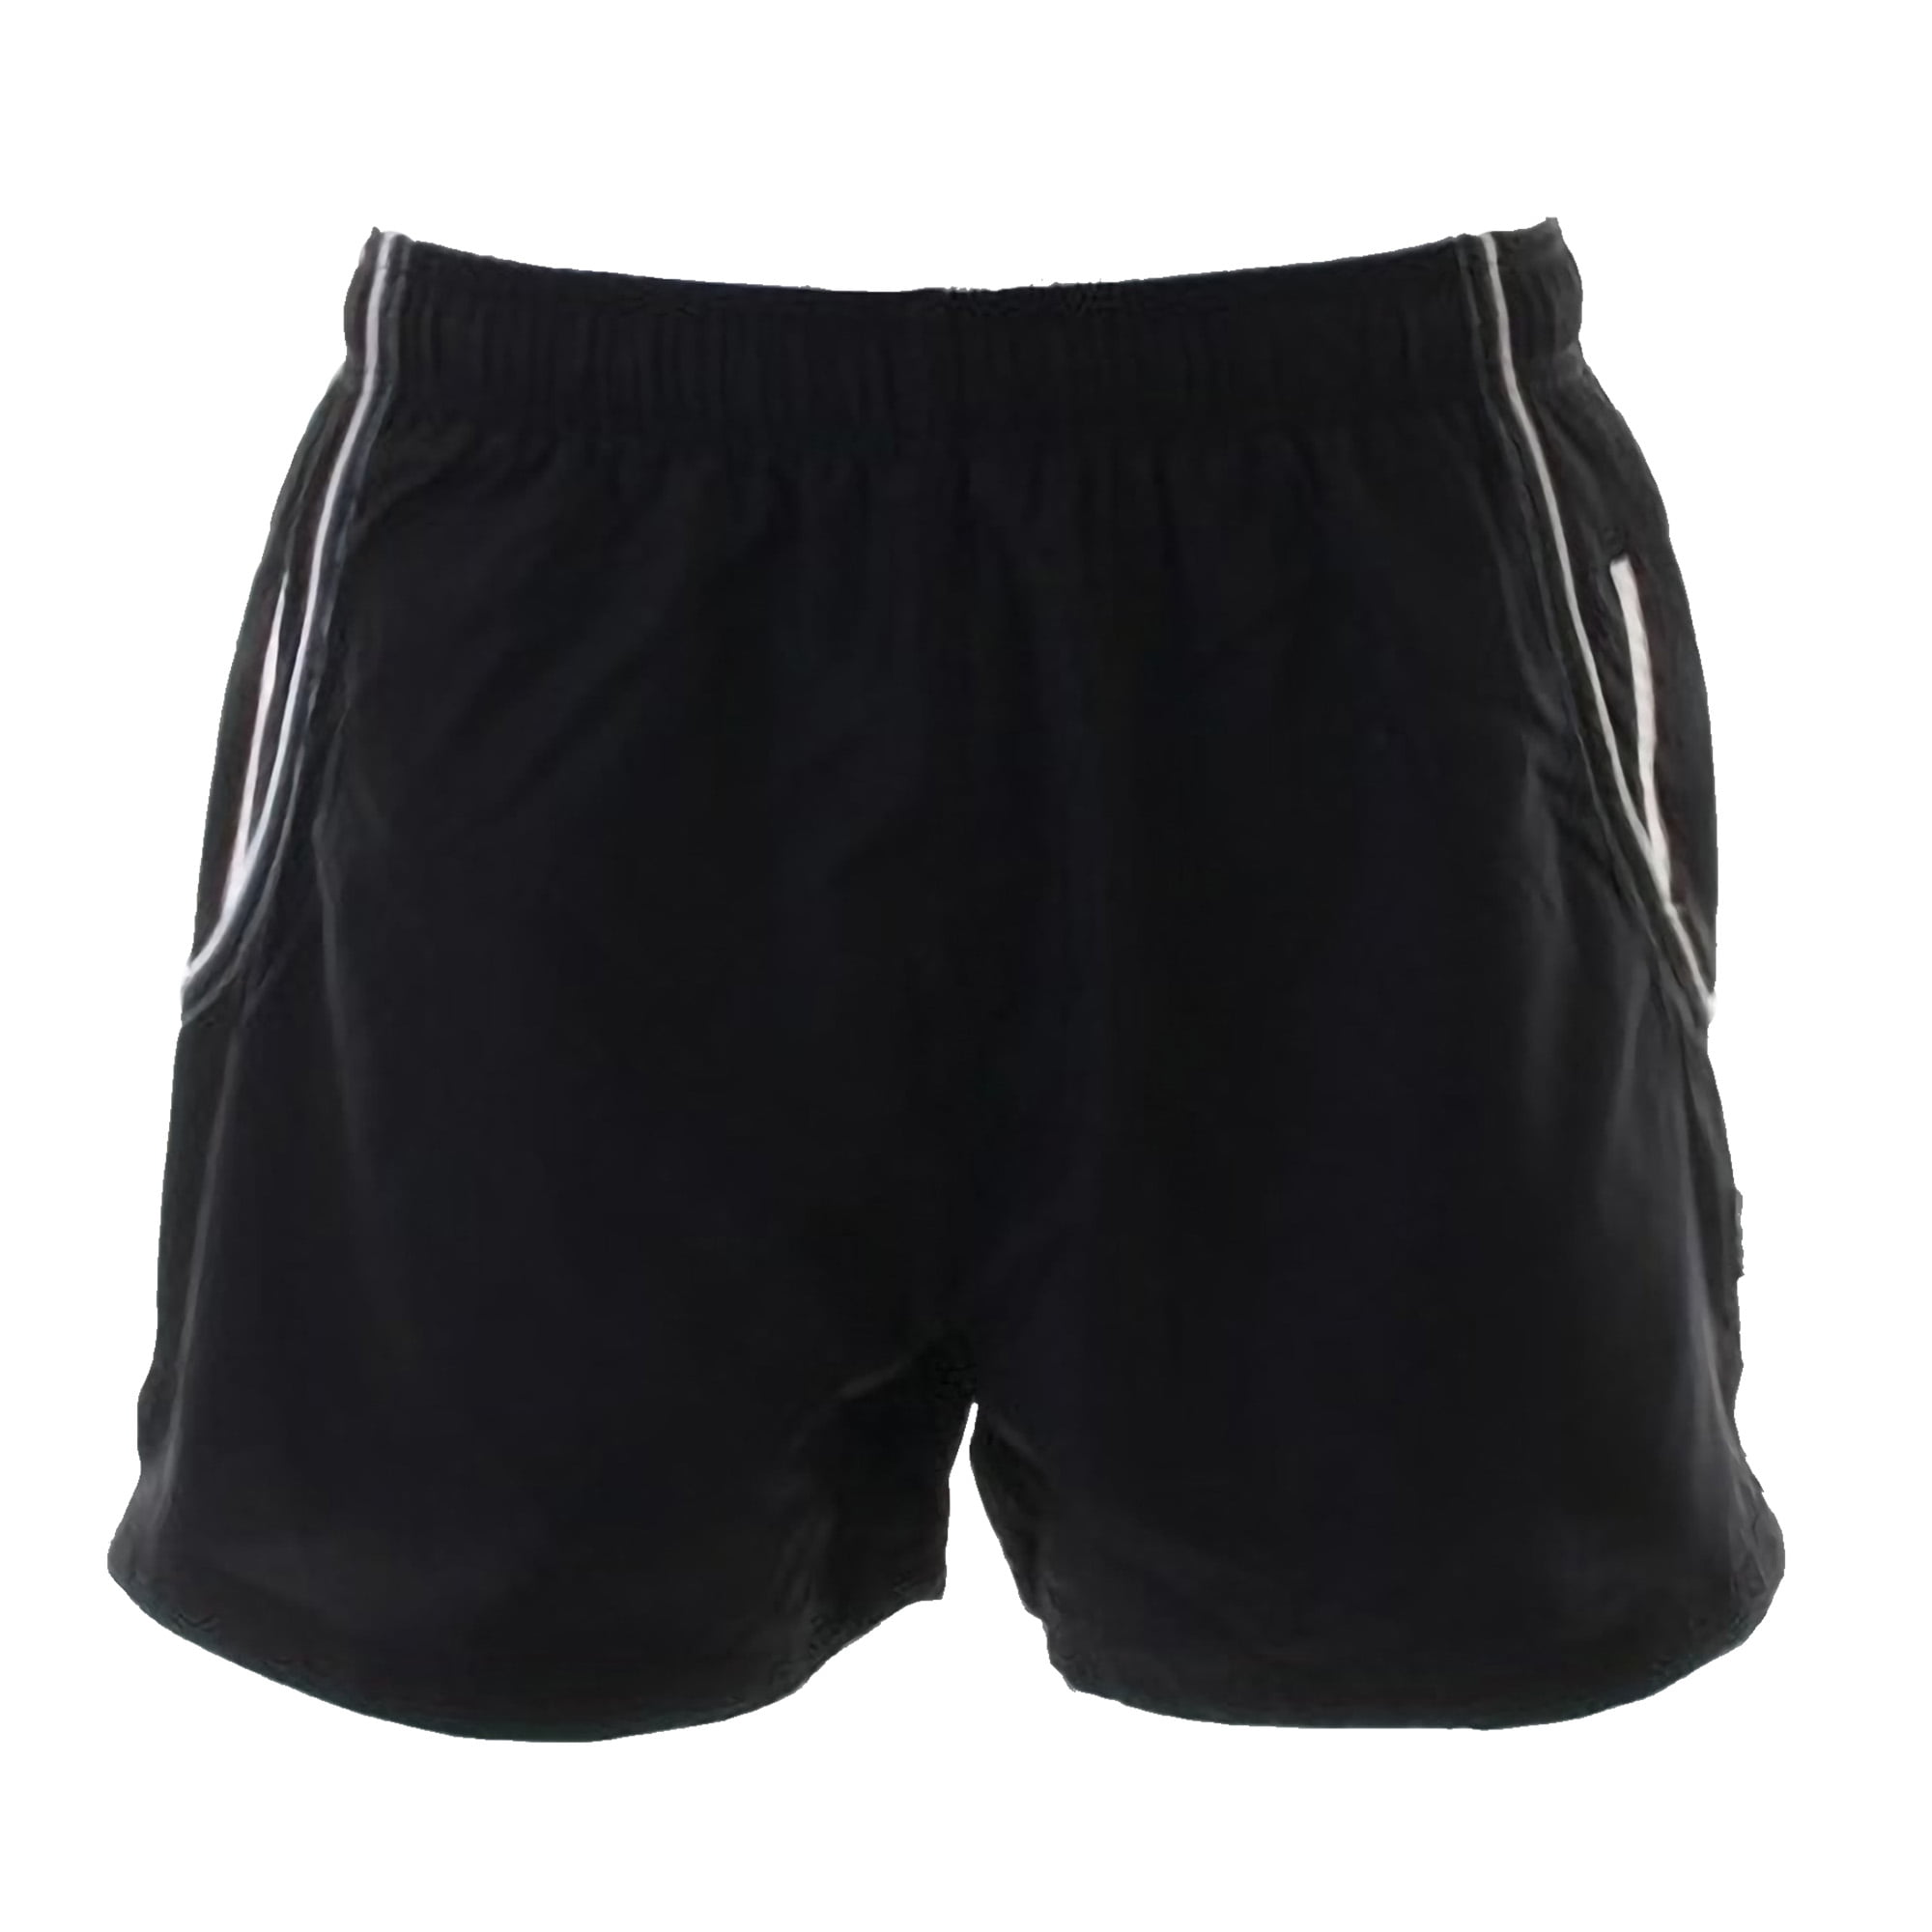 Gamegear Cooltex Mens Active Sports Training Fitness Gym Short Black,Navy 